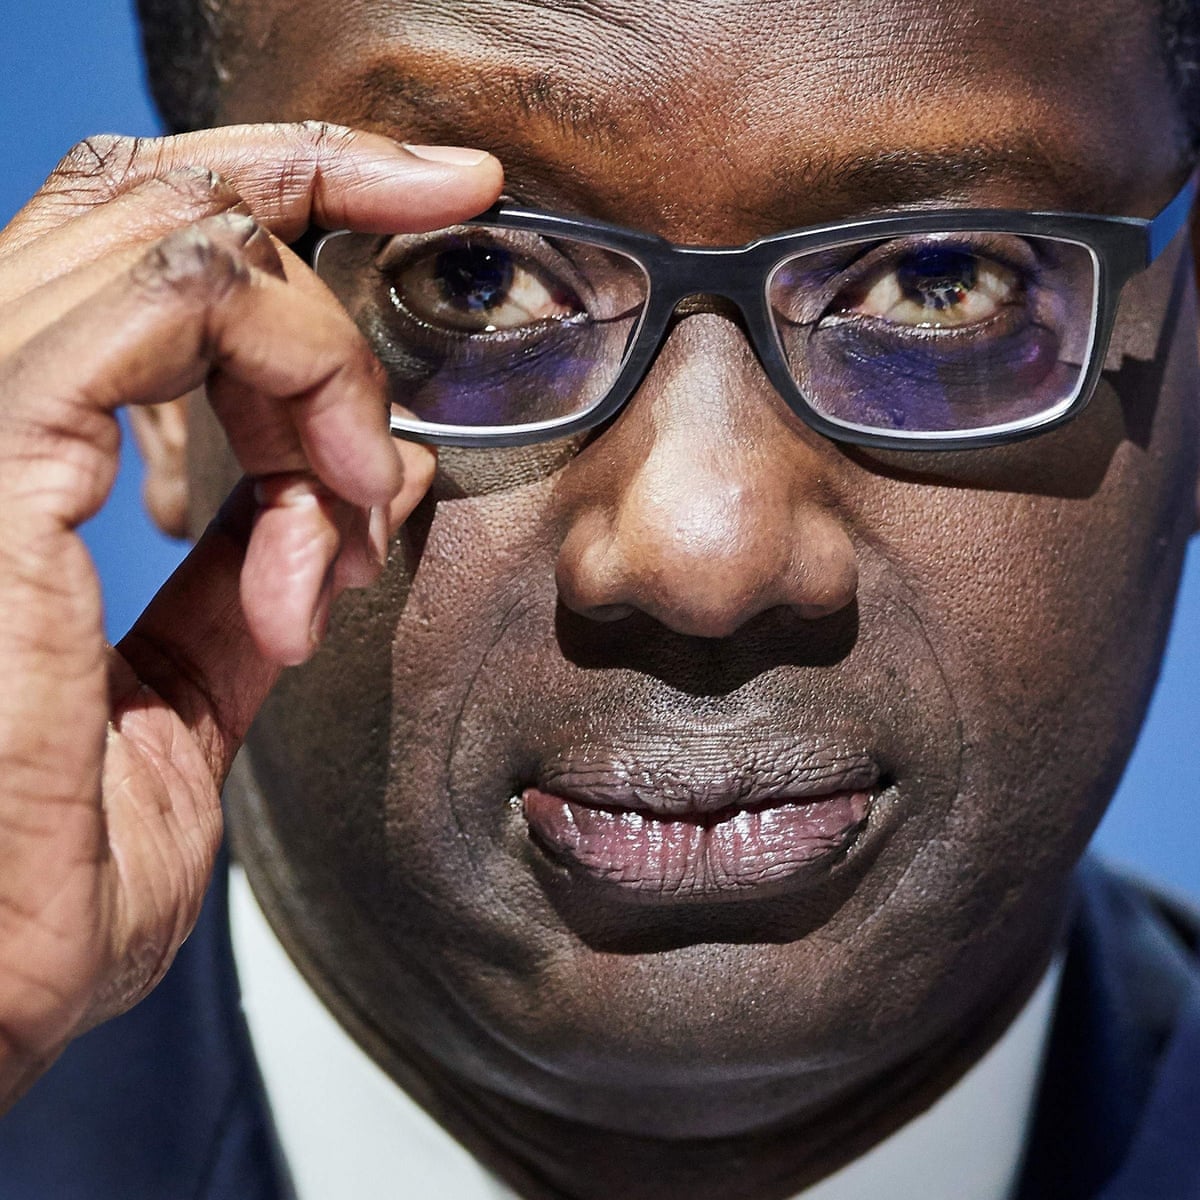 Tidjane Thiam: the man who traded politics for finance after military coup  | Tidjane Thiam | The Guardian